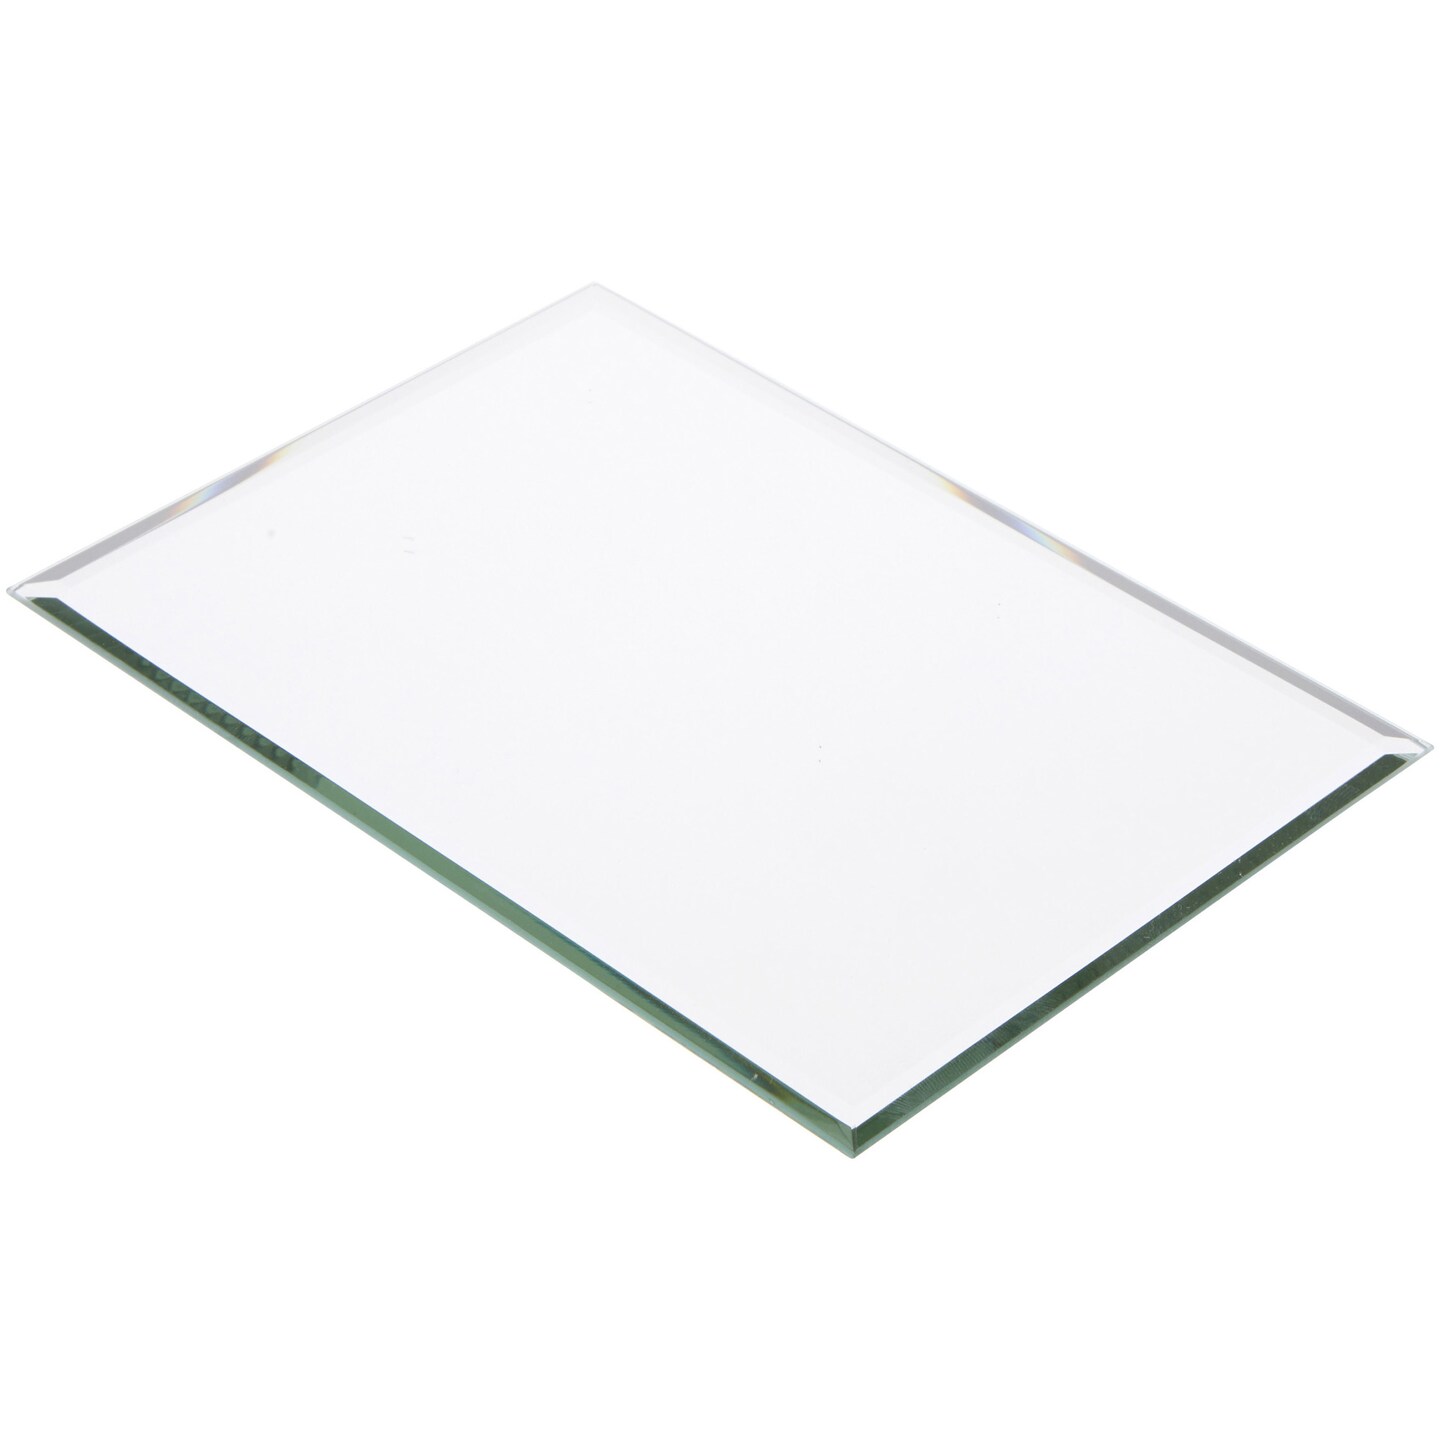 11 x 11 Acrylic Mirror Sheet for Replacement or DIY Crafts